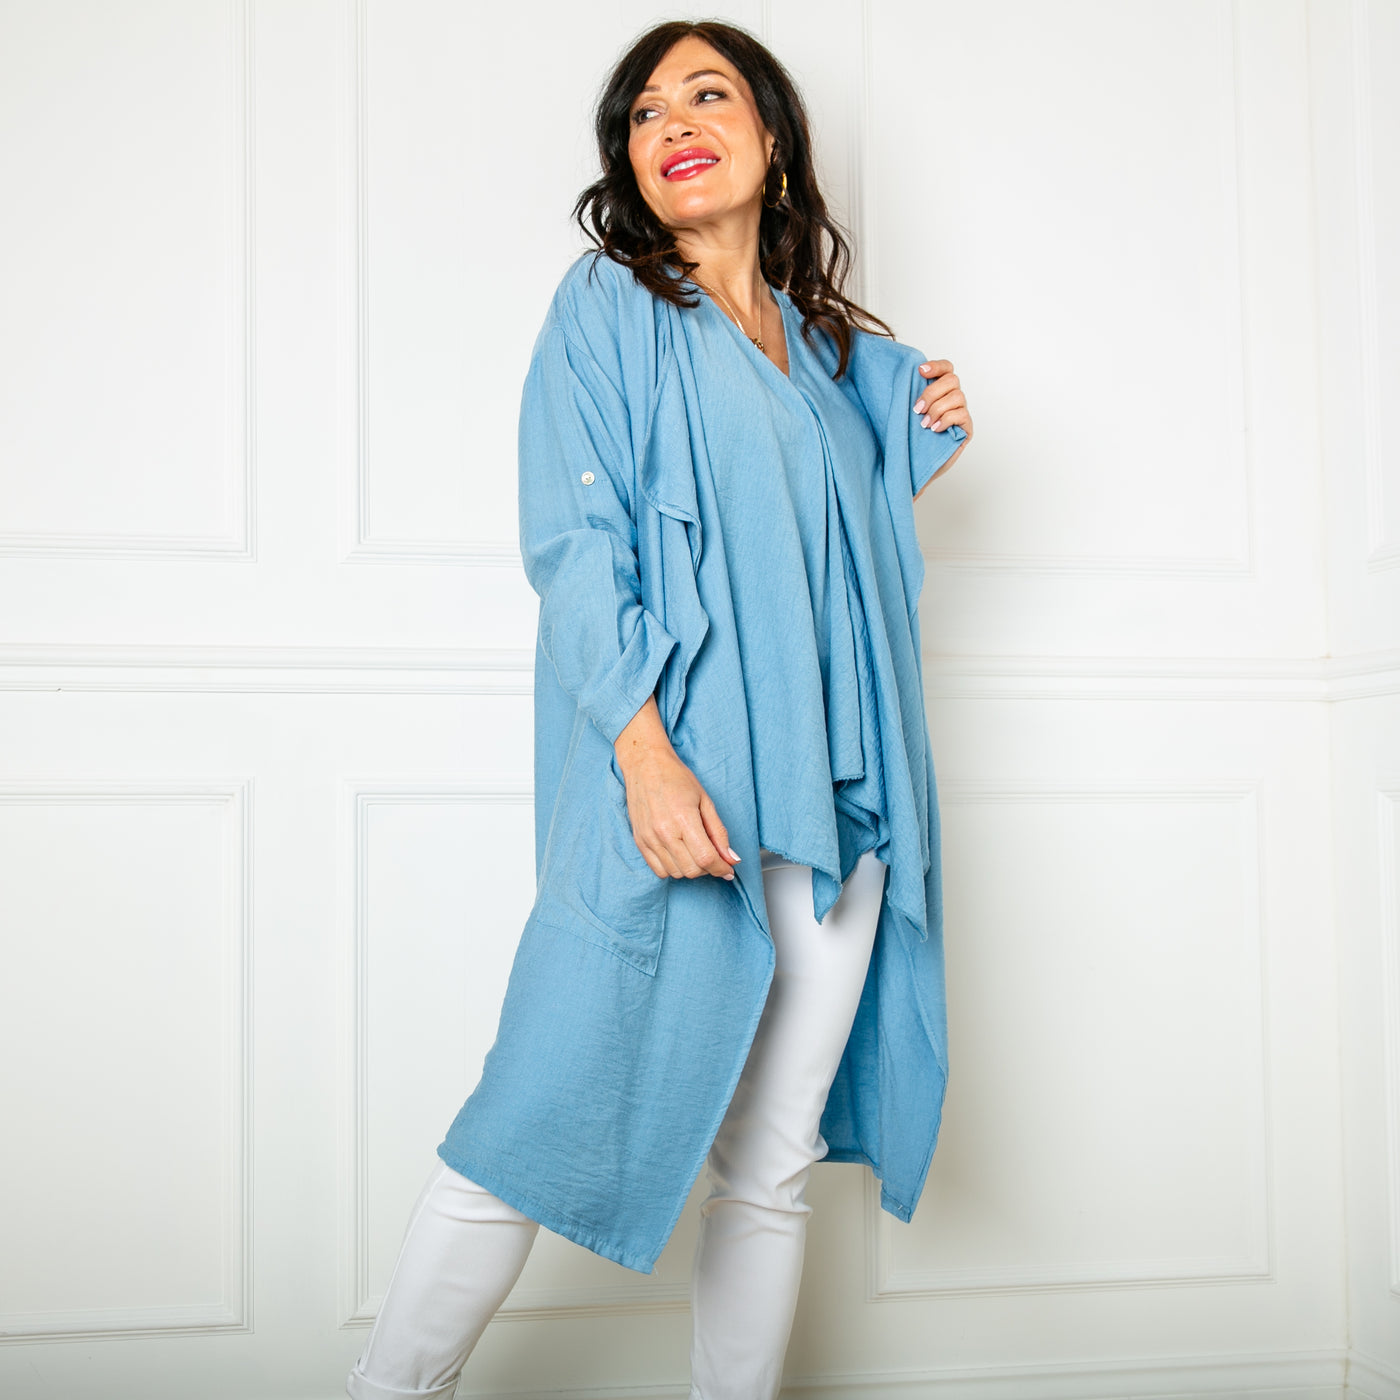 The denim blue Lightweight Waterfall Jacket with long sleeves that can be rolled up and buttoned at the elbow